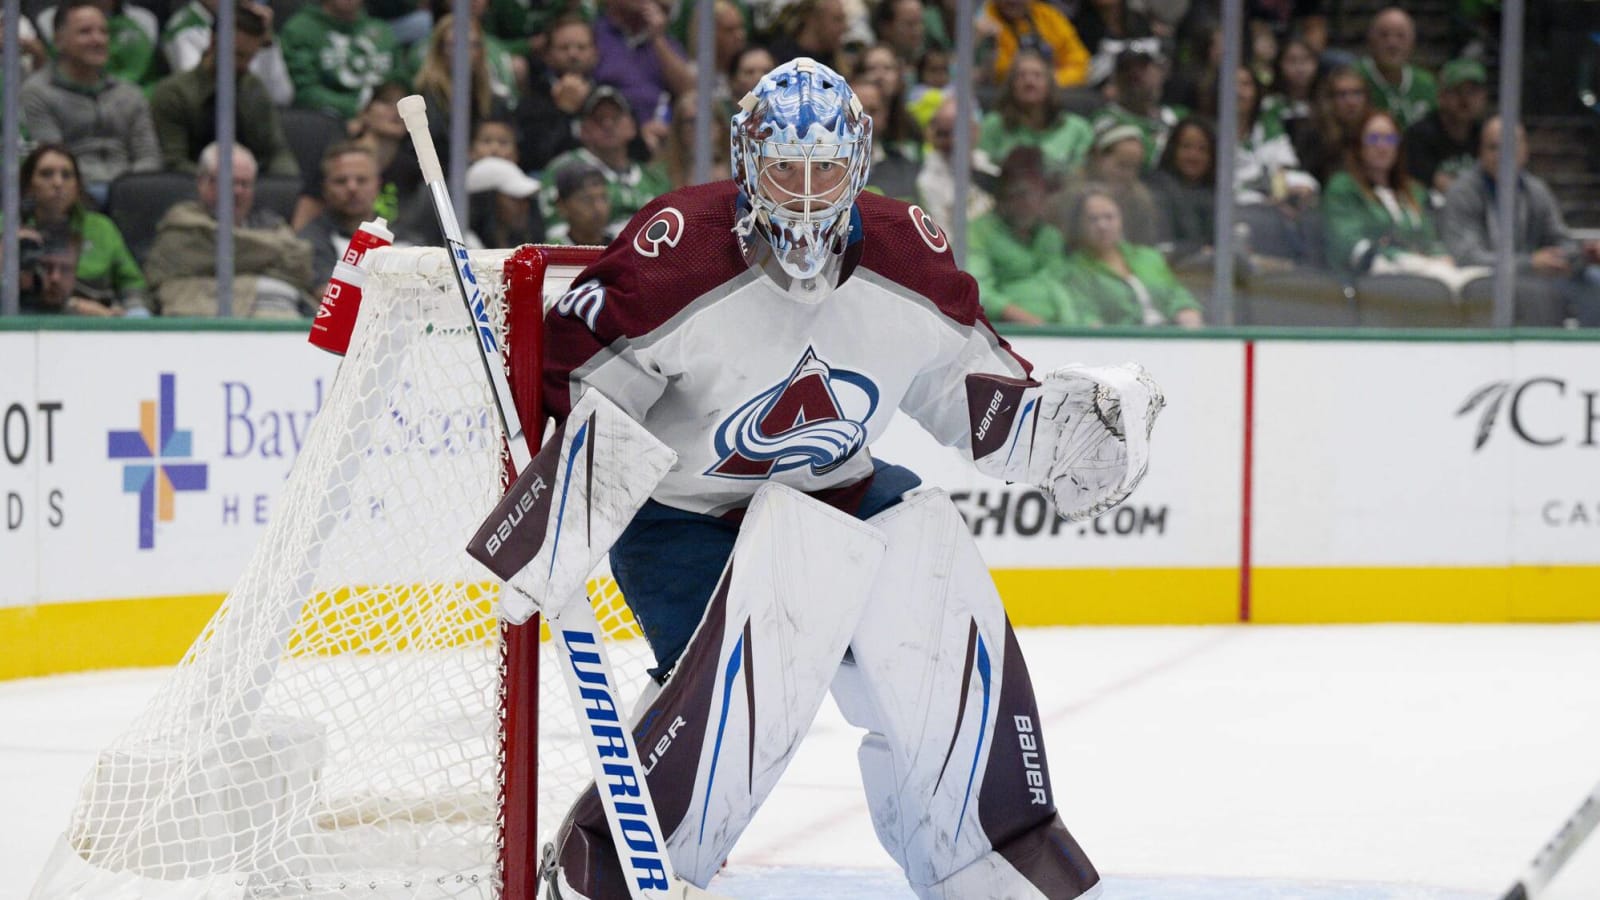 Avalanche Room: Annunen’s ‘Rock Solid’ Play May Earn Him More Starts